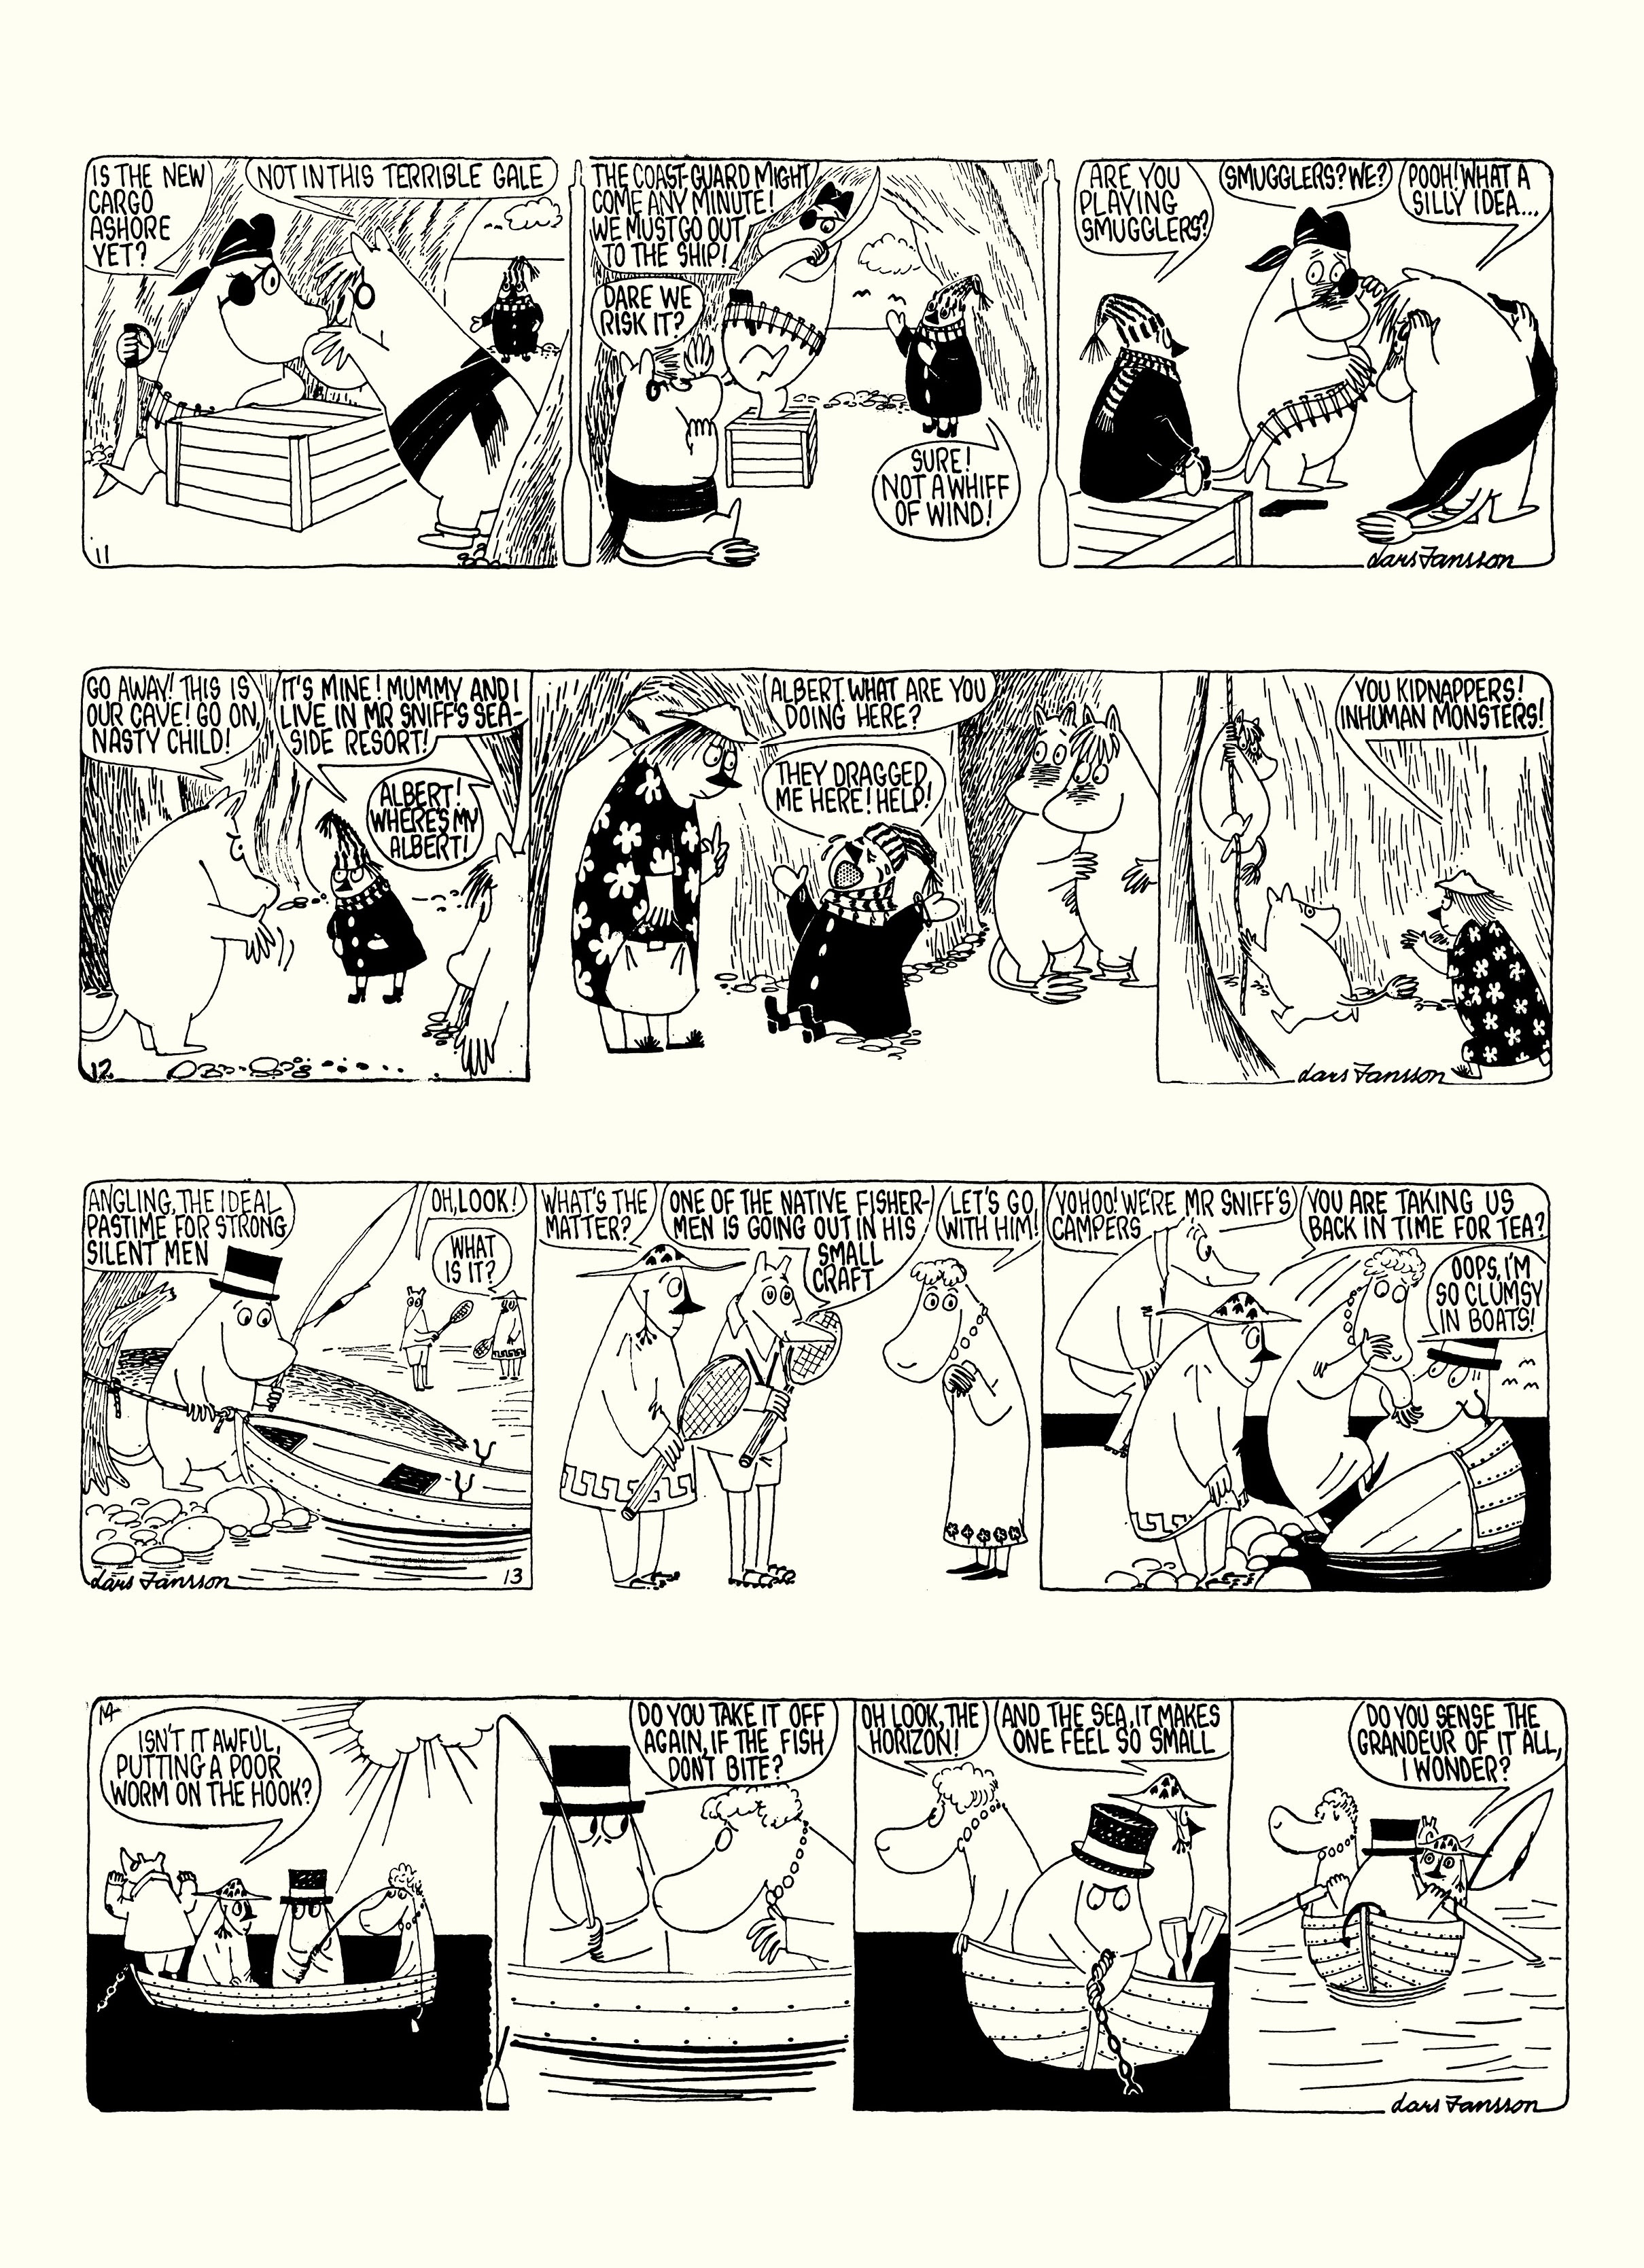 Read online Moomin: The Complete Lars Jansson Comic Strip comic -  Issue # TPB 8 - 54